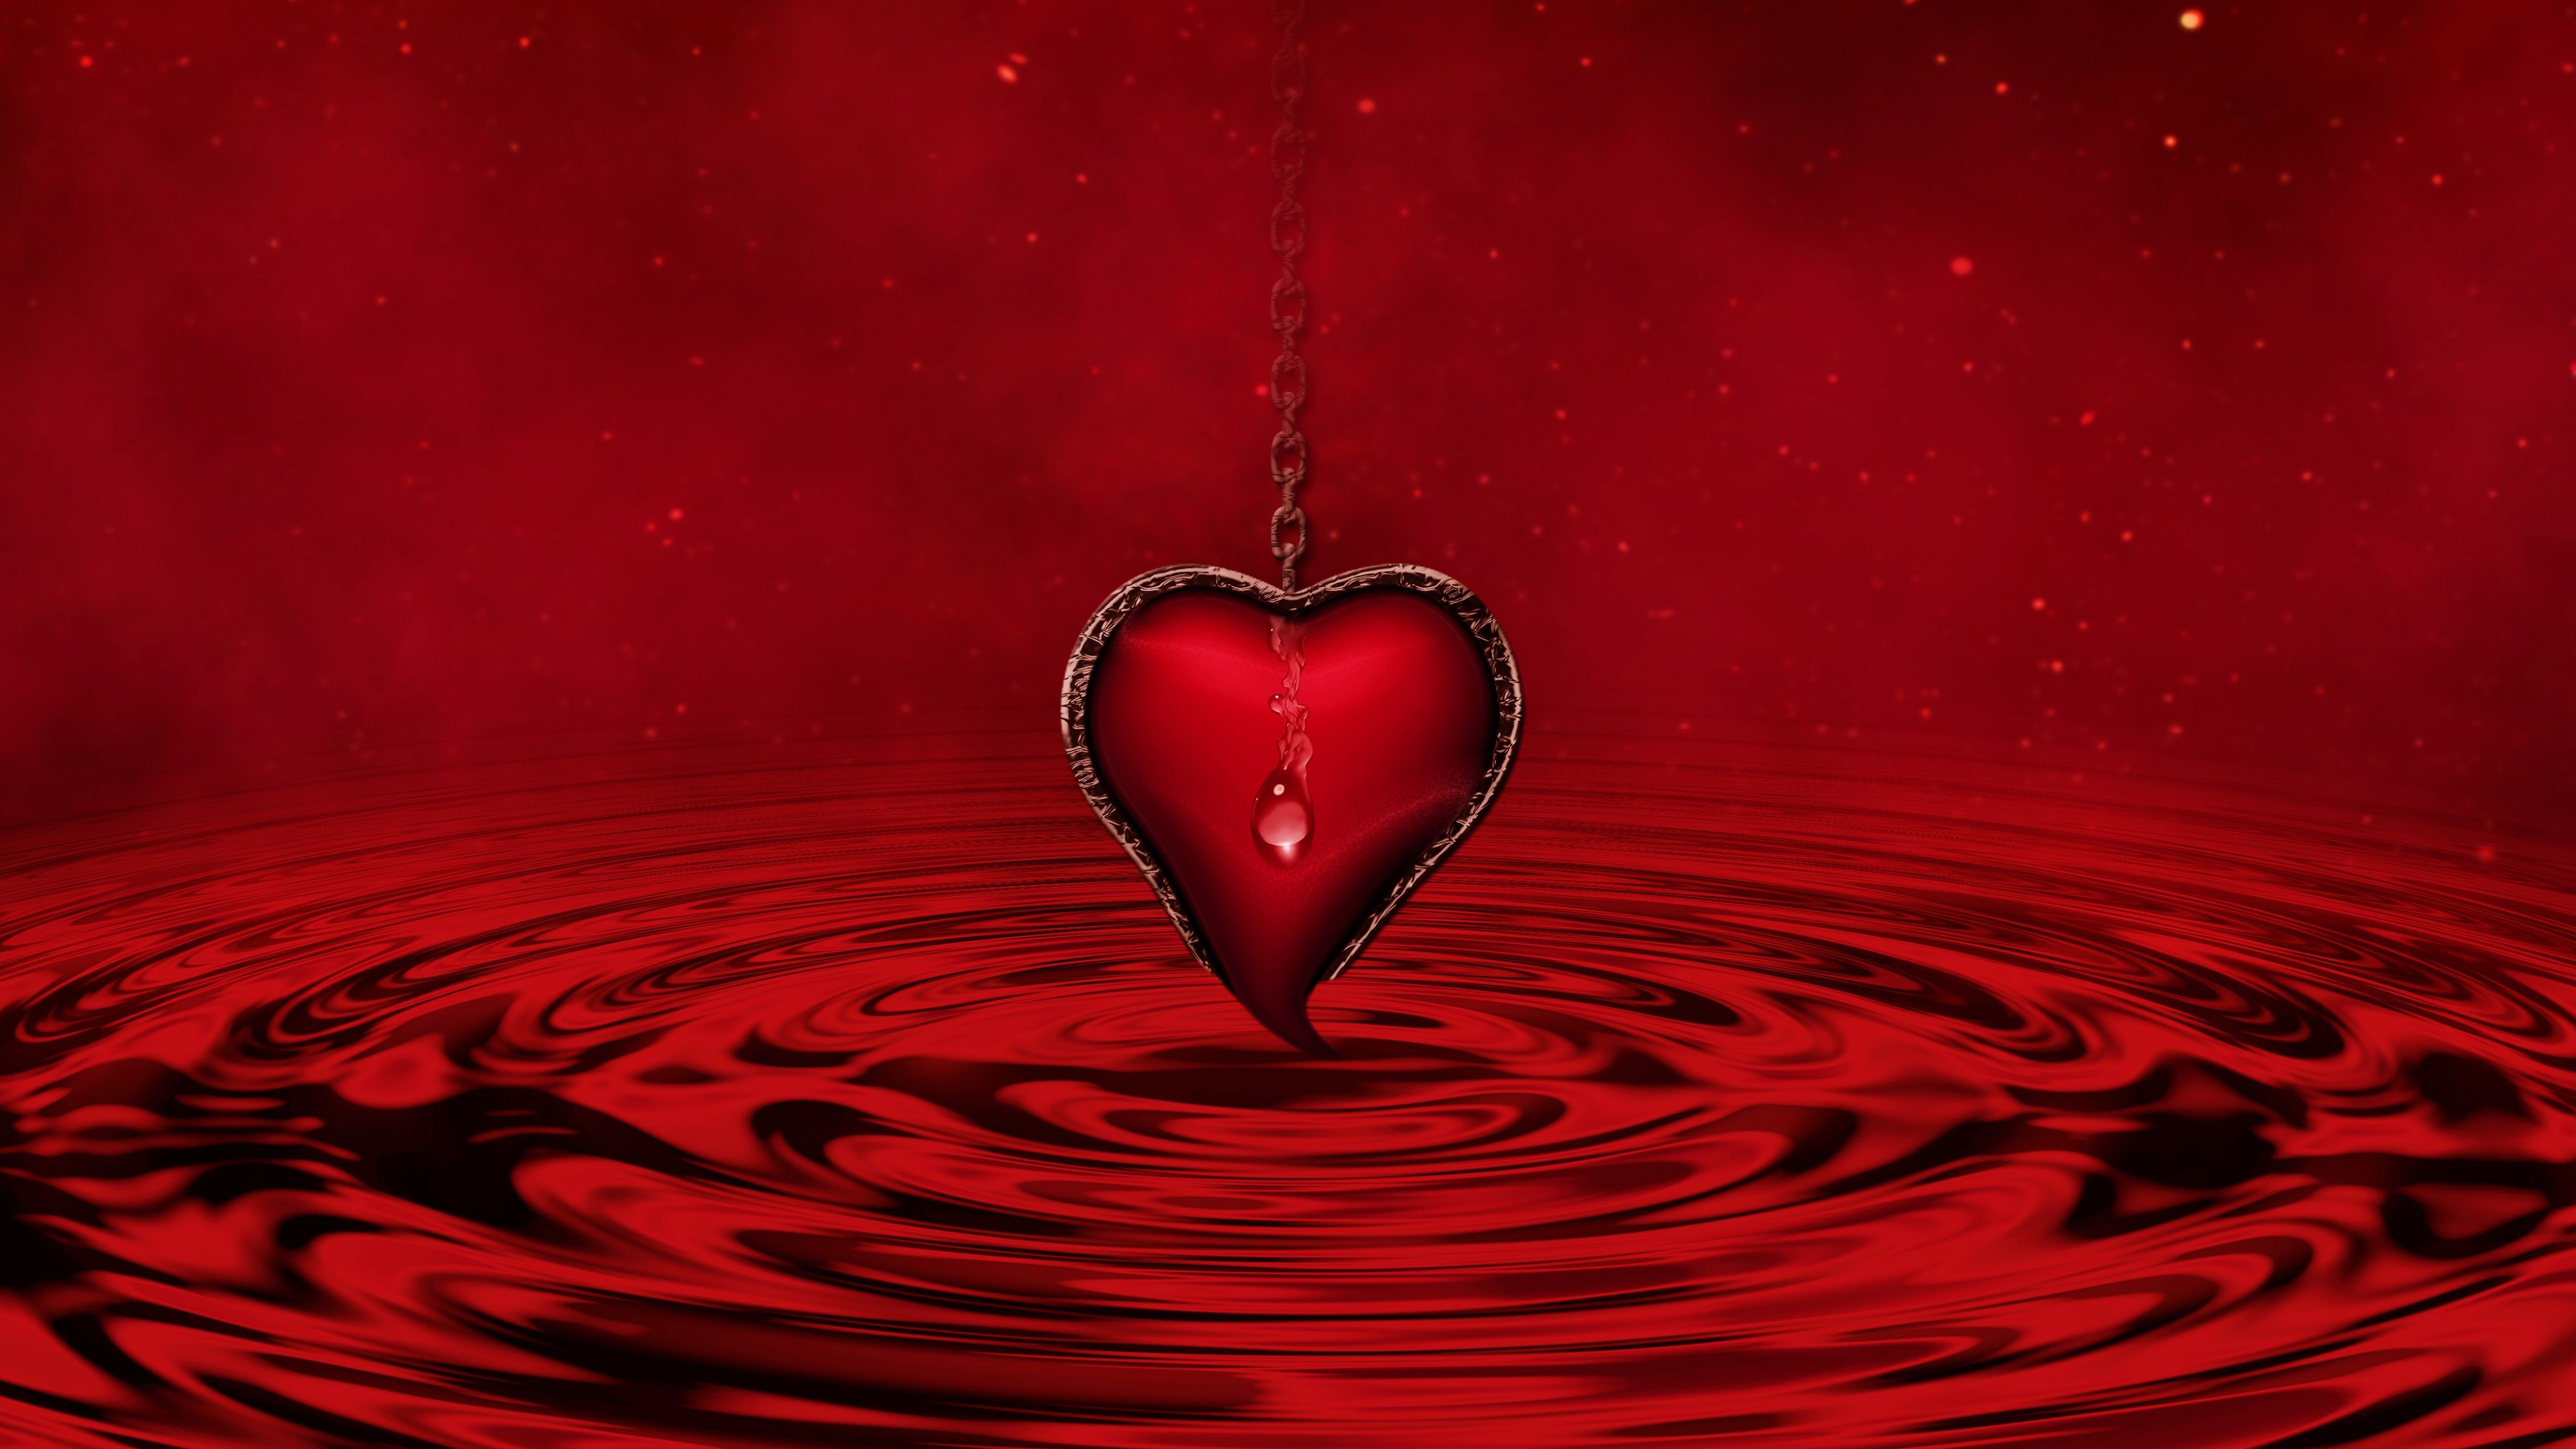 Red heart 4K Wallpaper, Water, Red background, Stars, Waves, Chain, 5K, Love